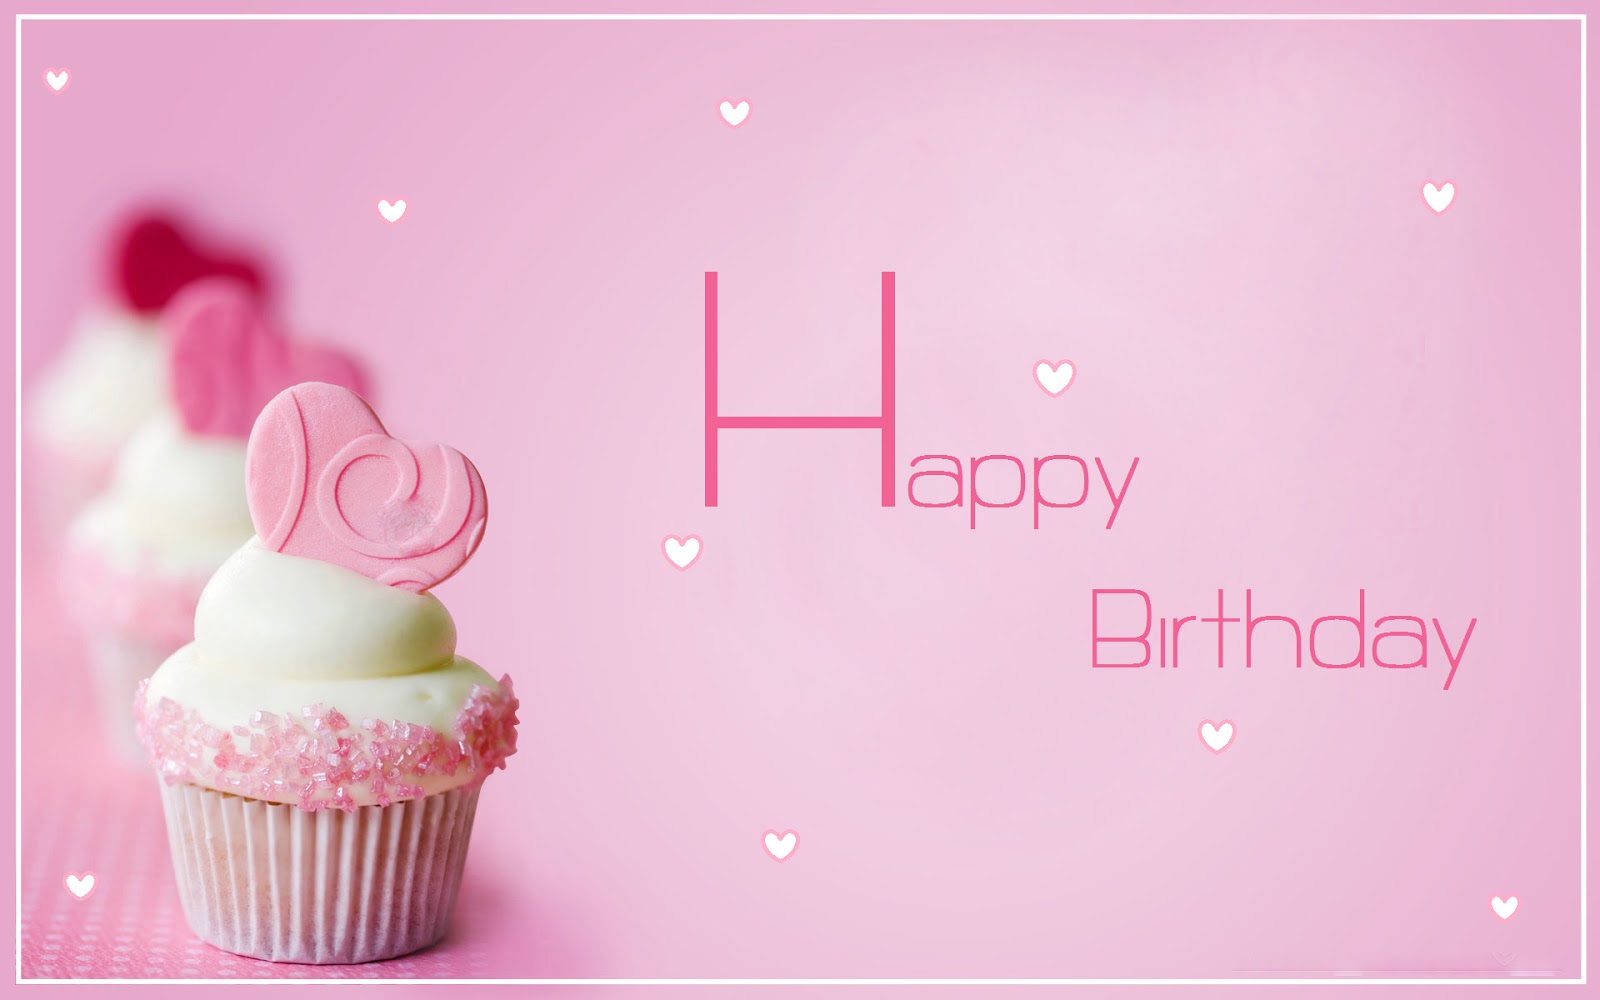 Happy BirtHDay Pink Background With Little Hearts For Girls Image Jpg